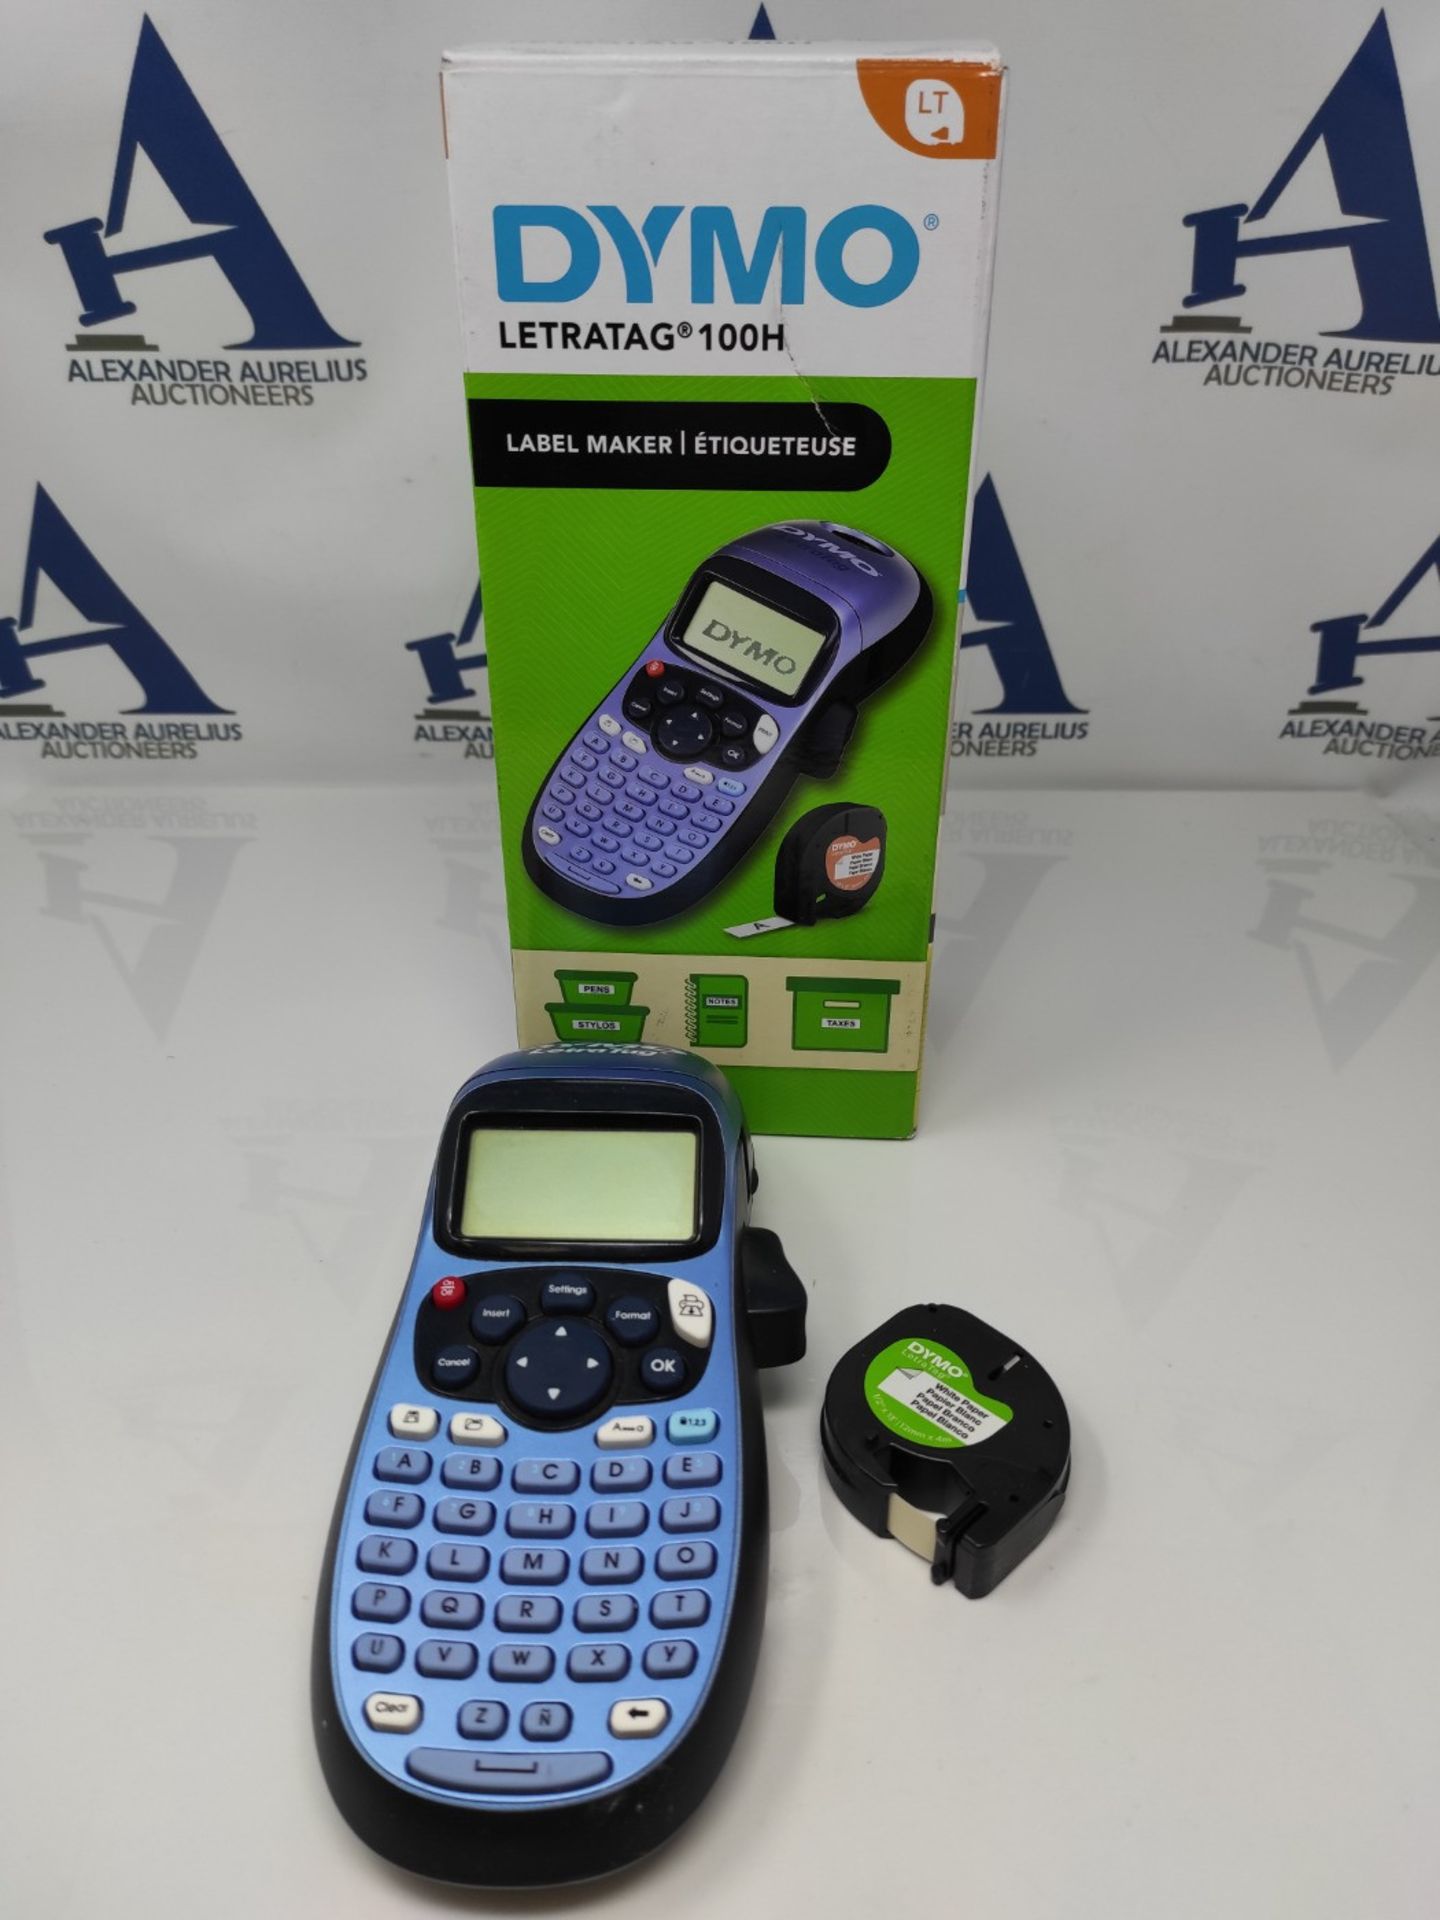 Dymo LetraTag LT-100H Handheld Label Maker | ABC Keyboard Label Printer with Easy-to-U - Image 2 of 2